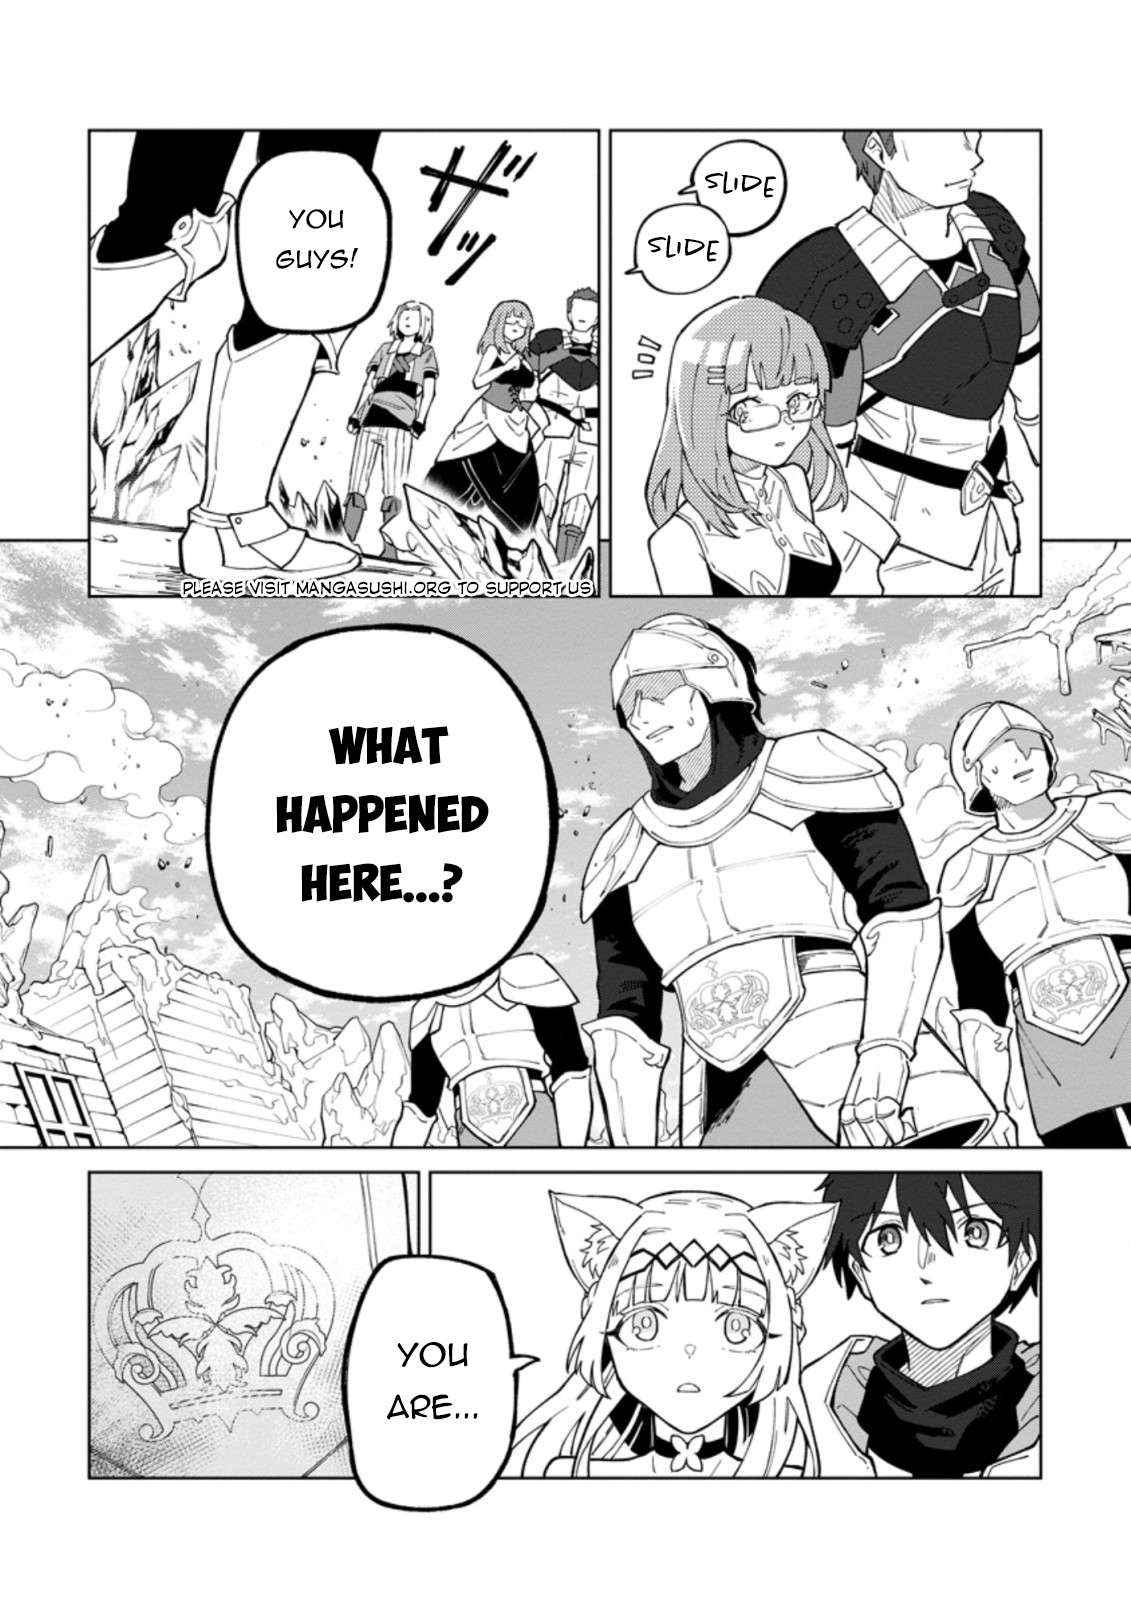 The White Mage Who Was Banished From The Hero's Party Is Picked Up By An S Rank Adventurer~ This White Mage Is Too Out Of The Ordinary! - 19.1 page 6-73264e09